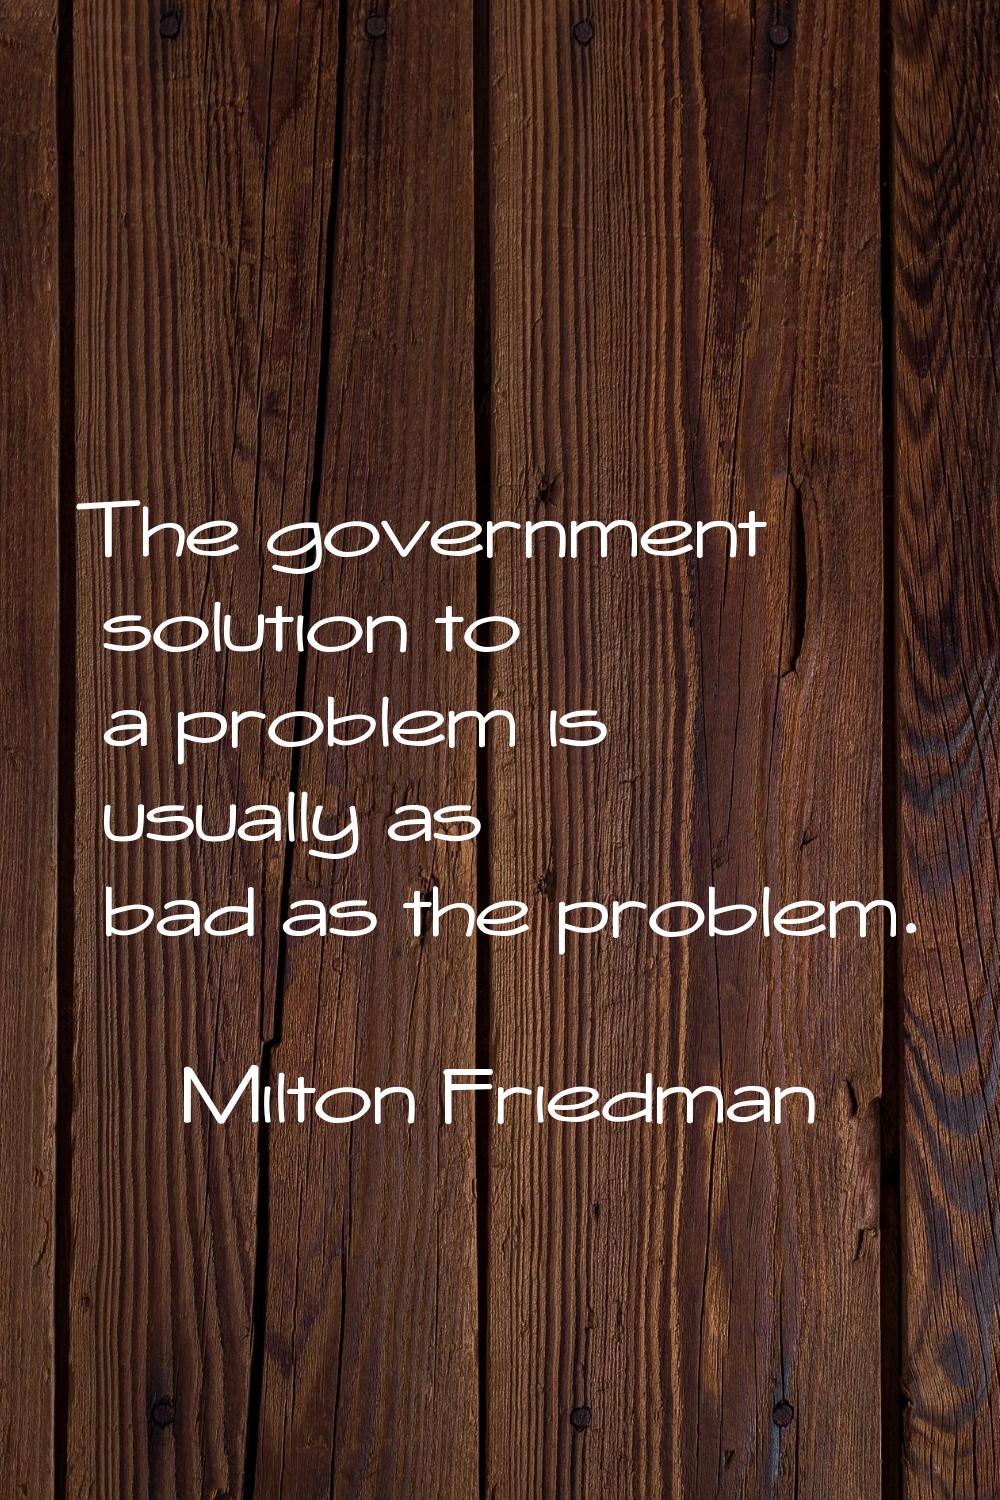 The government solution to a problem is usually as bad as the problem.